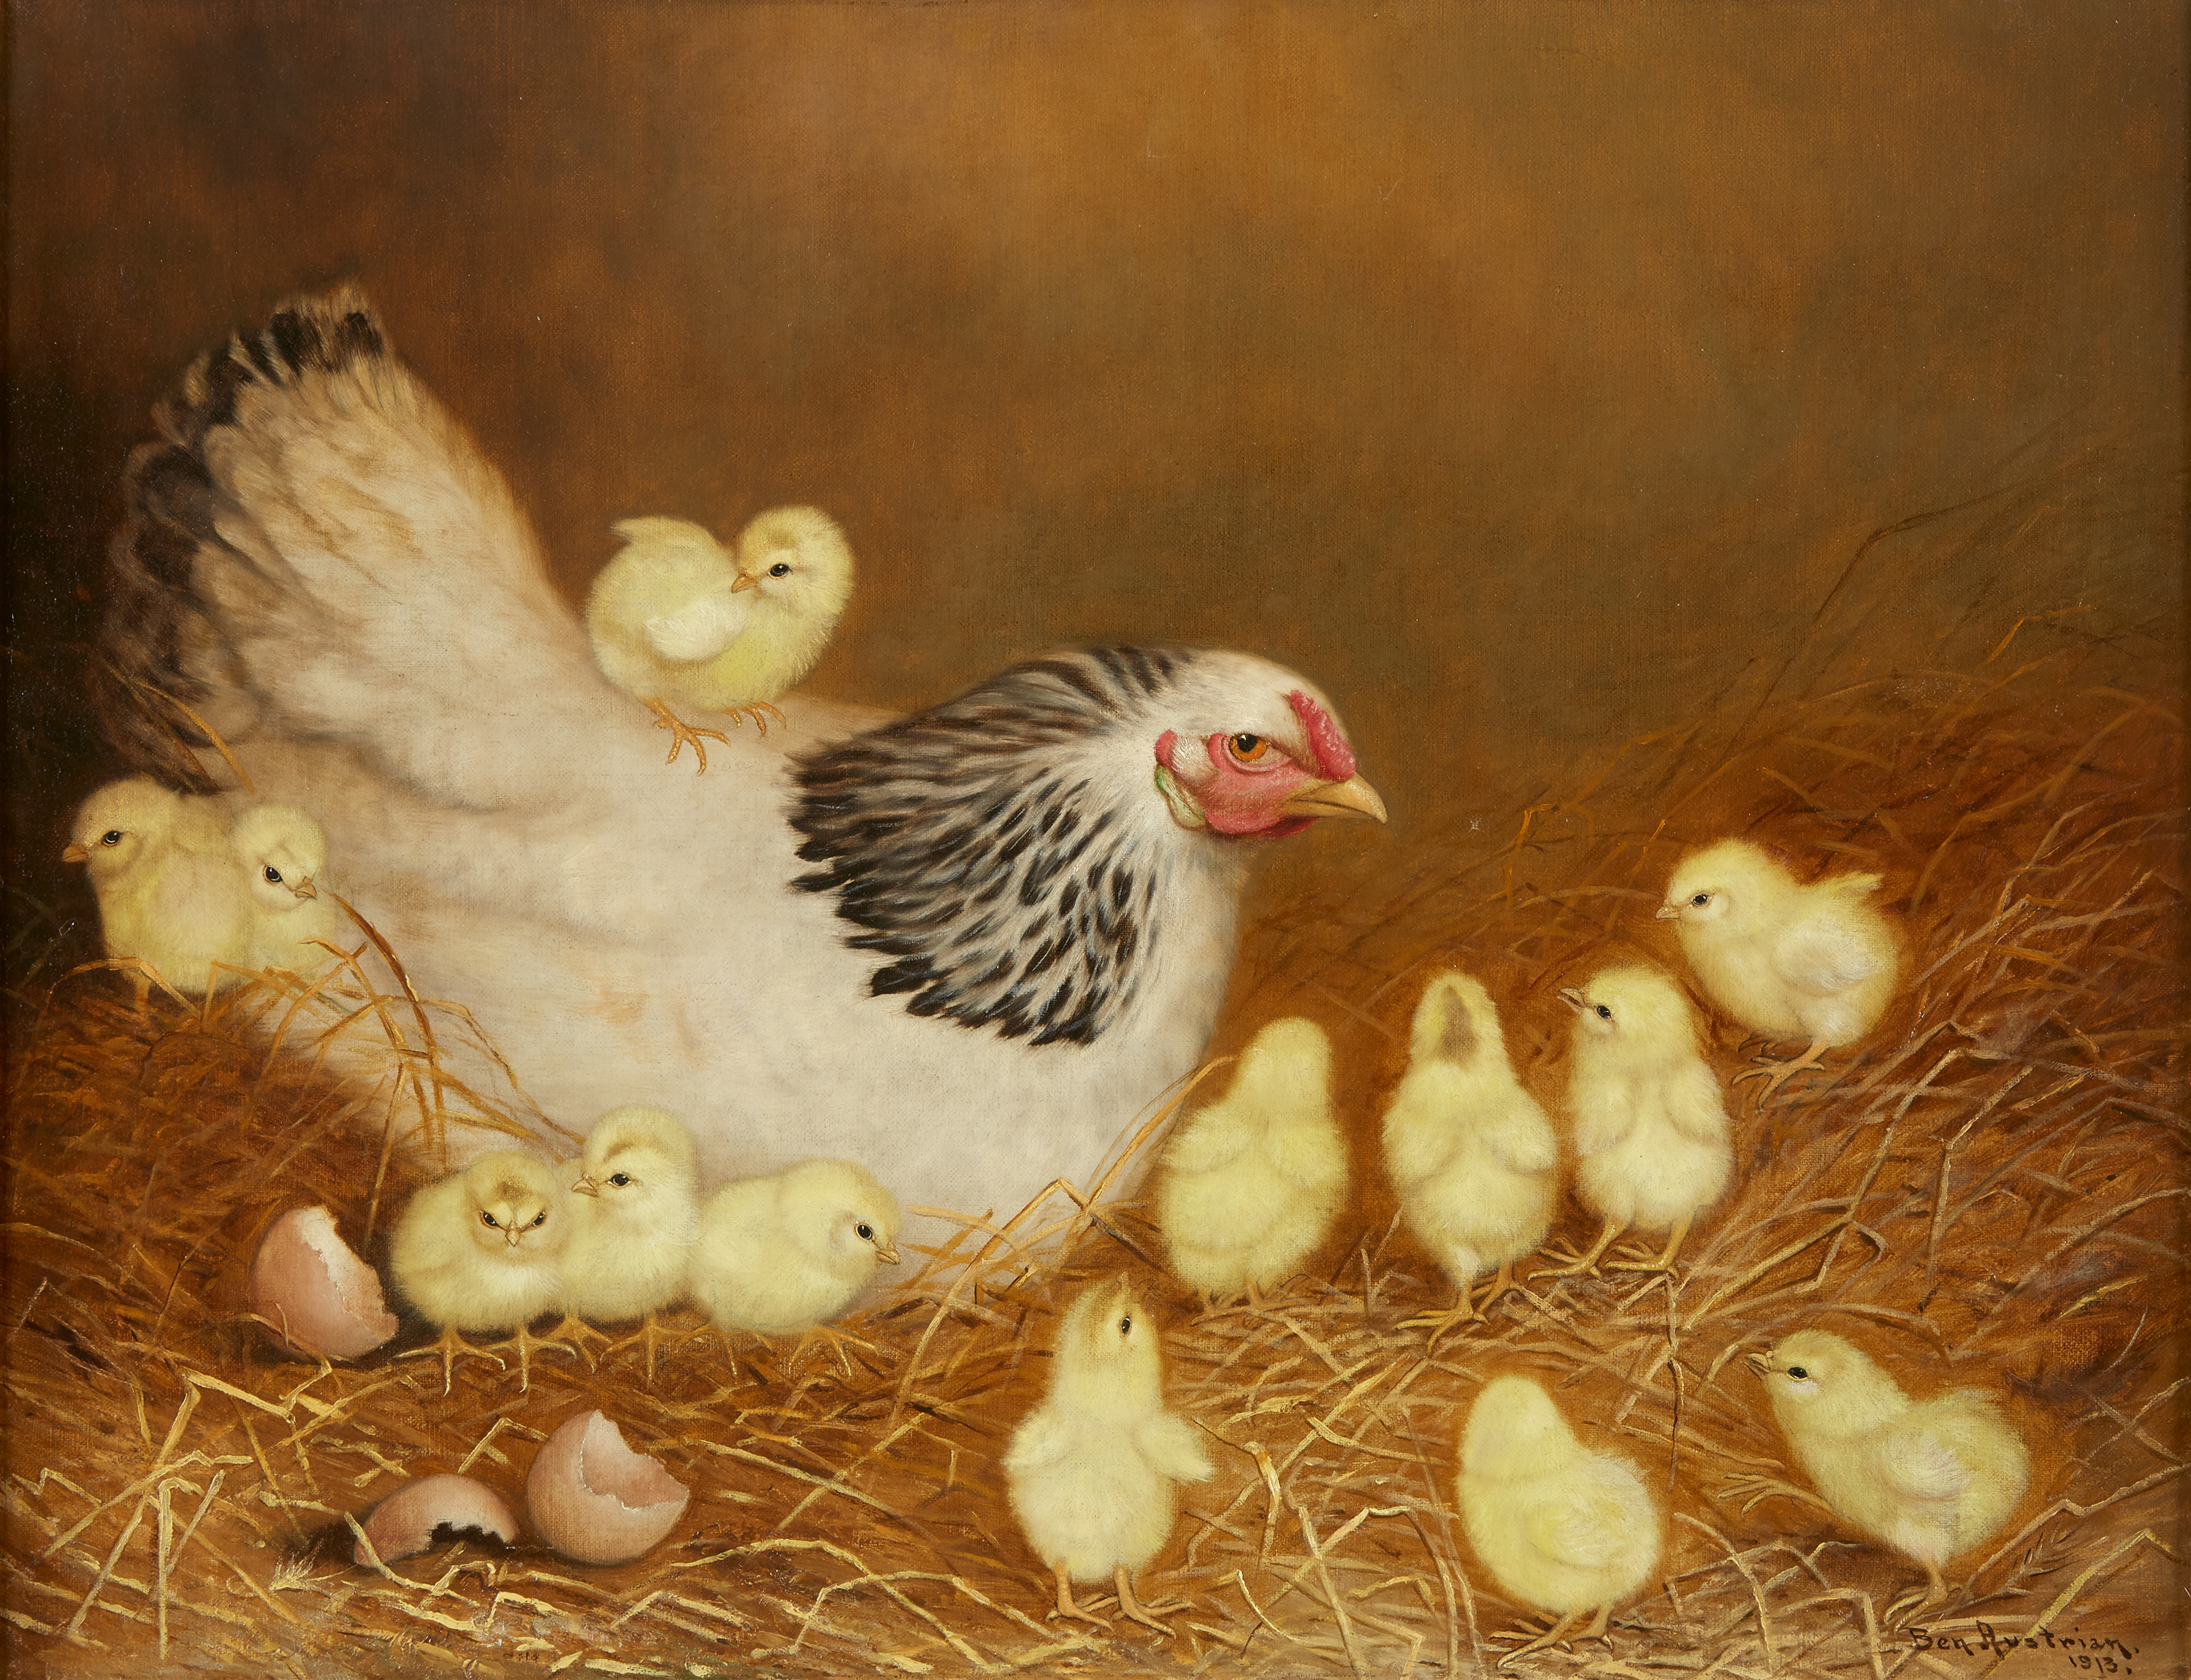 Ben Austrian's painting White Hen with Chickens, sold at Freeman's in June 2019.